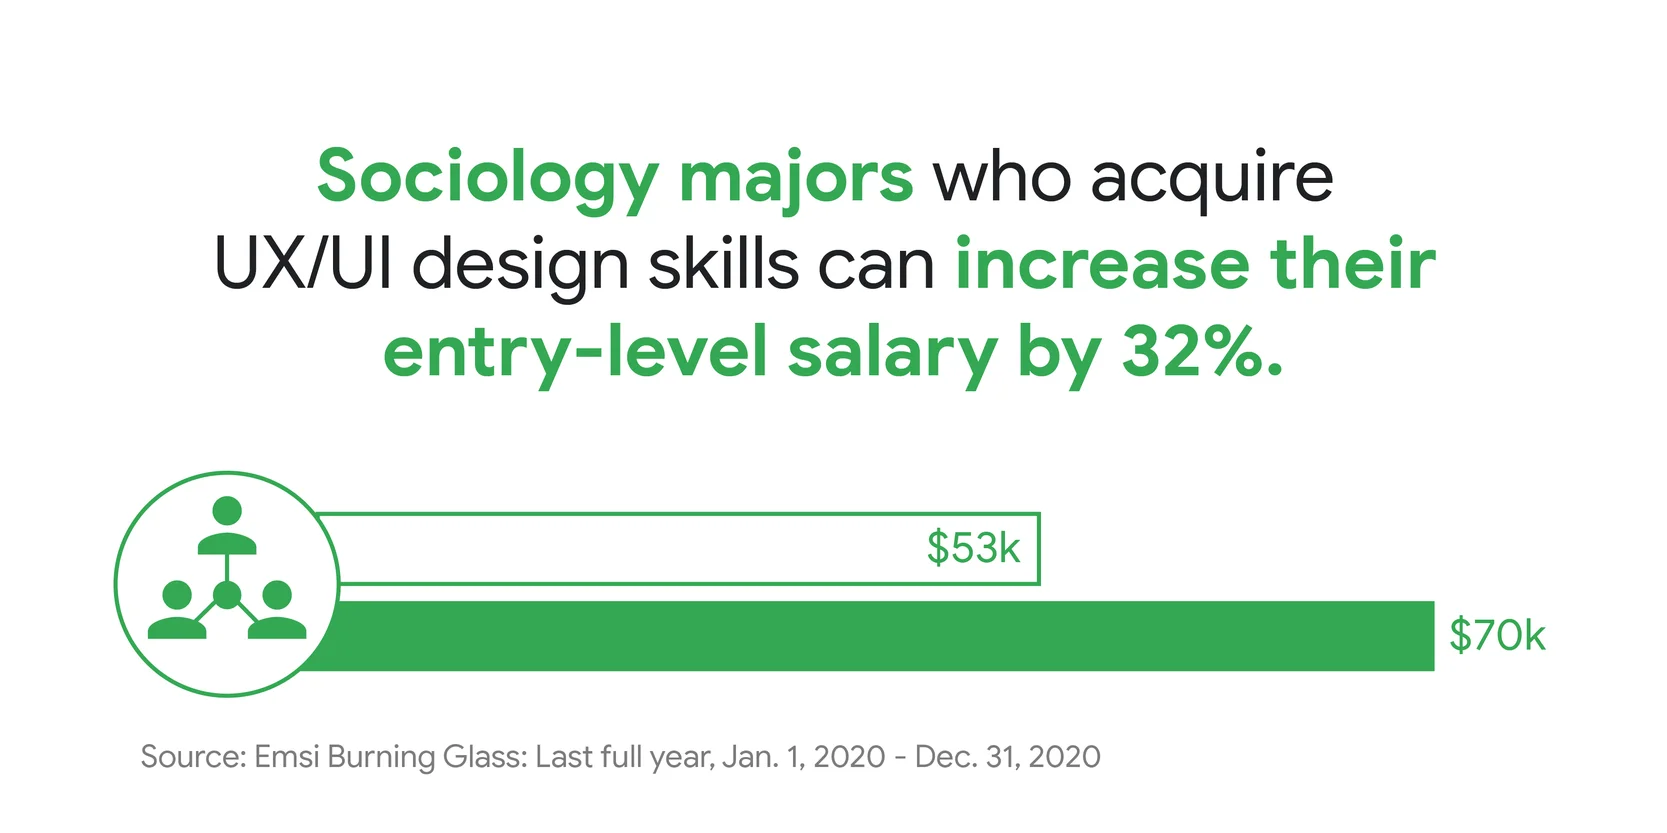 According to Emsi Burning Glass, sociology majors who acquire user experience or user interface design skills can increase their entry-level salaries by 32%, from an average of $53,000 per year to an average of $70,000 per year.